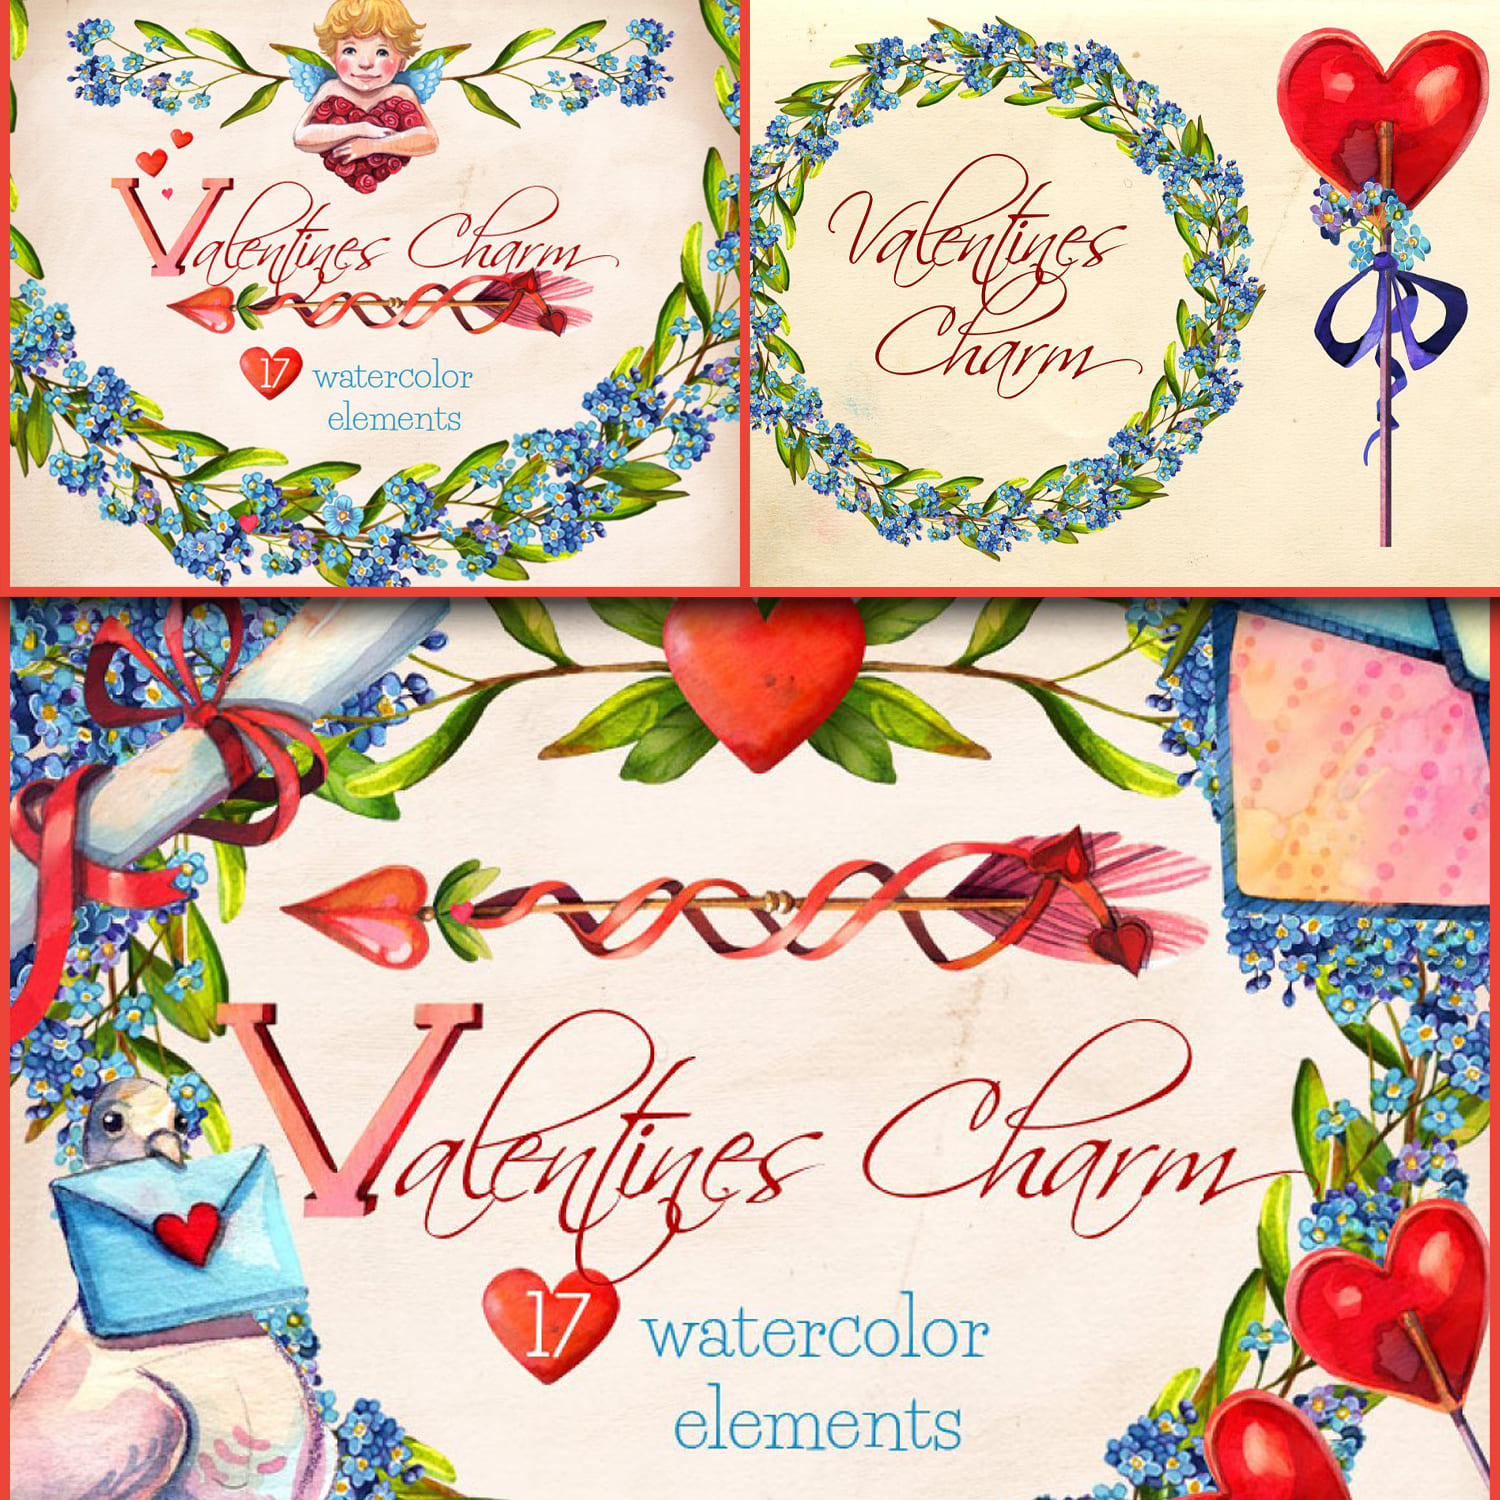 16 watercolor elements of Valentines charm watercolor clip art.